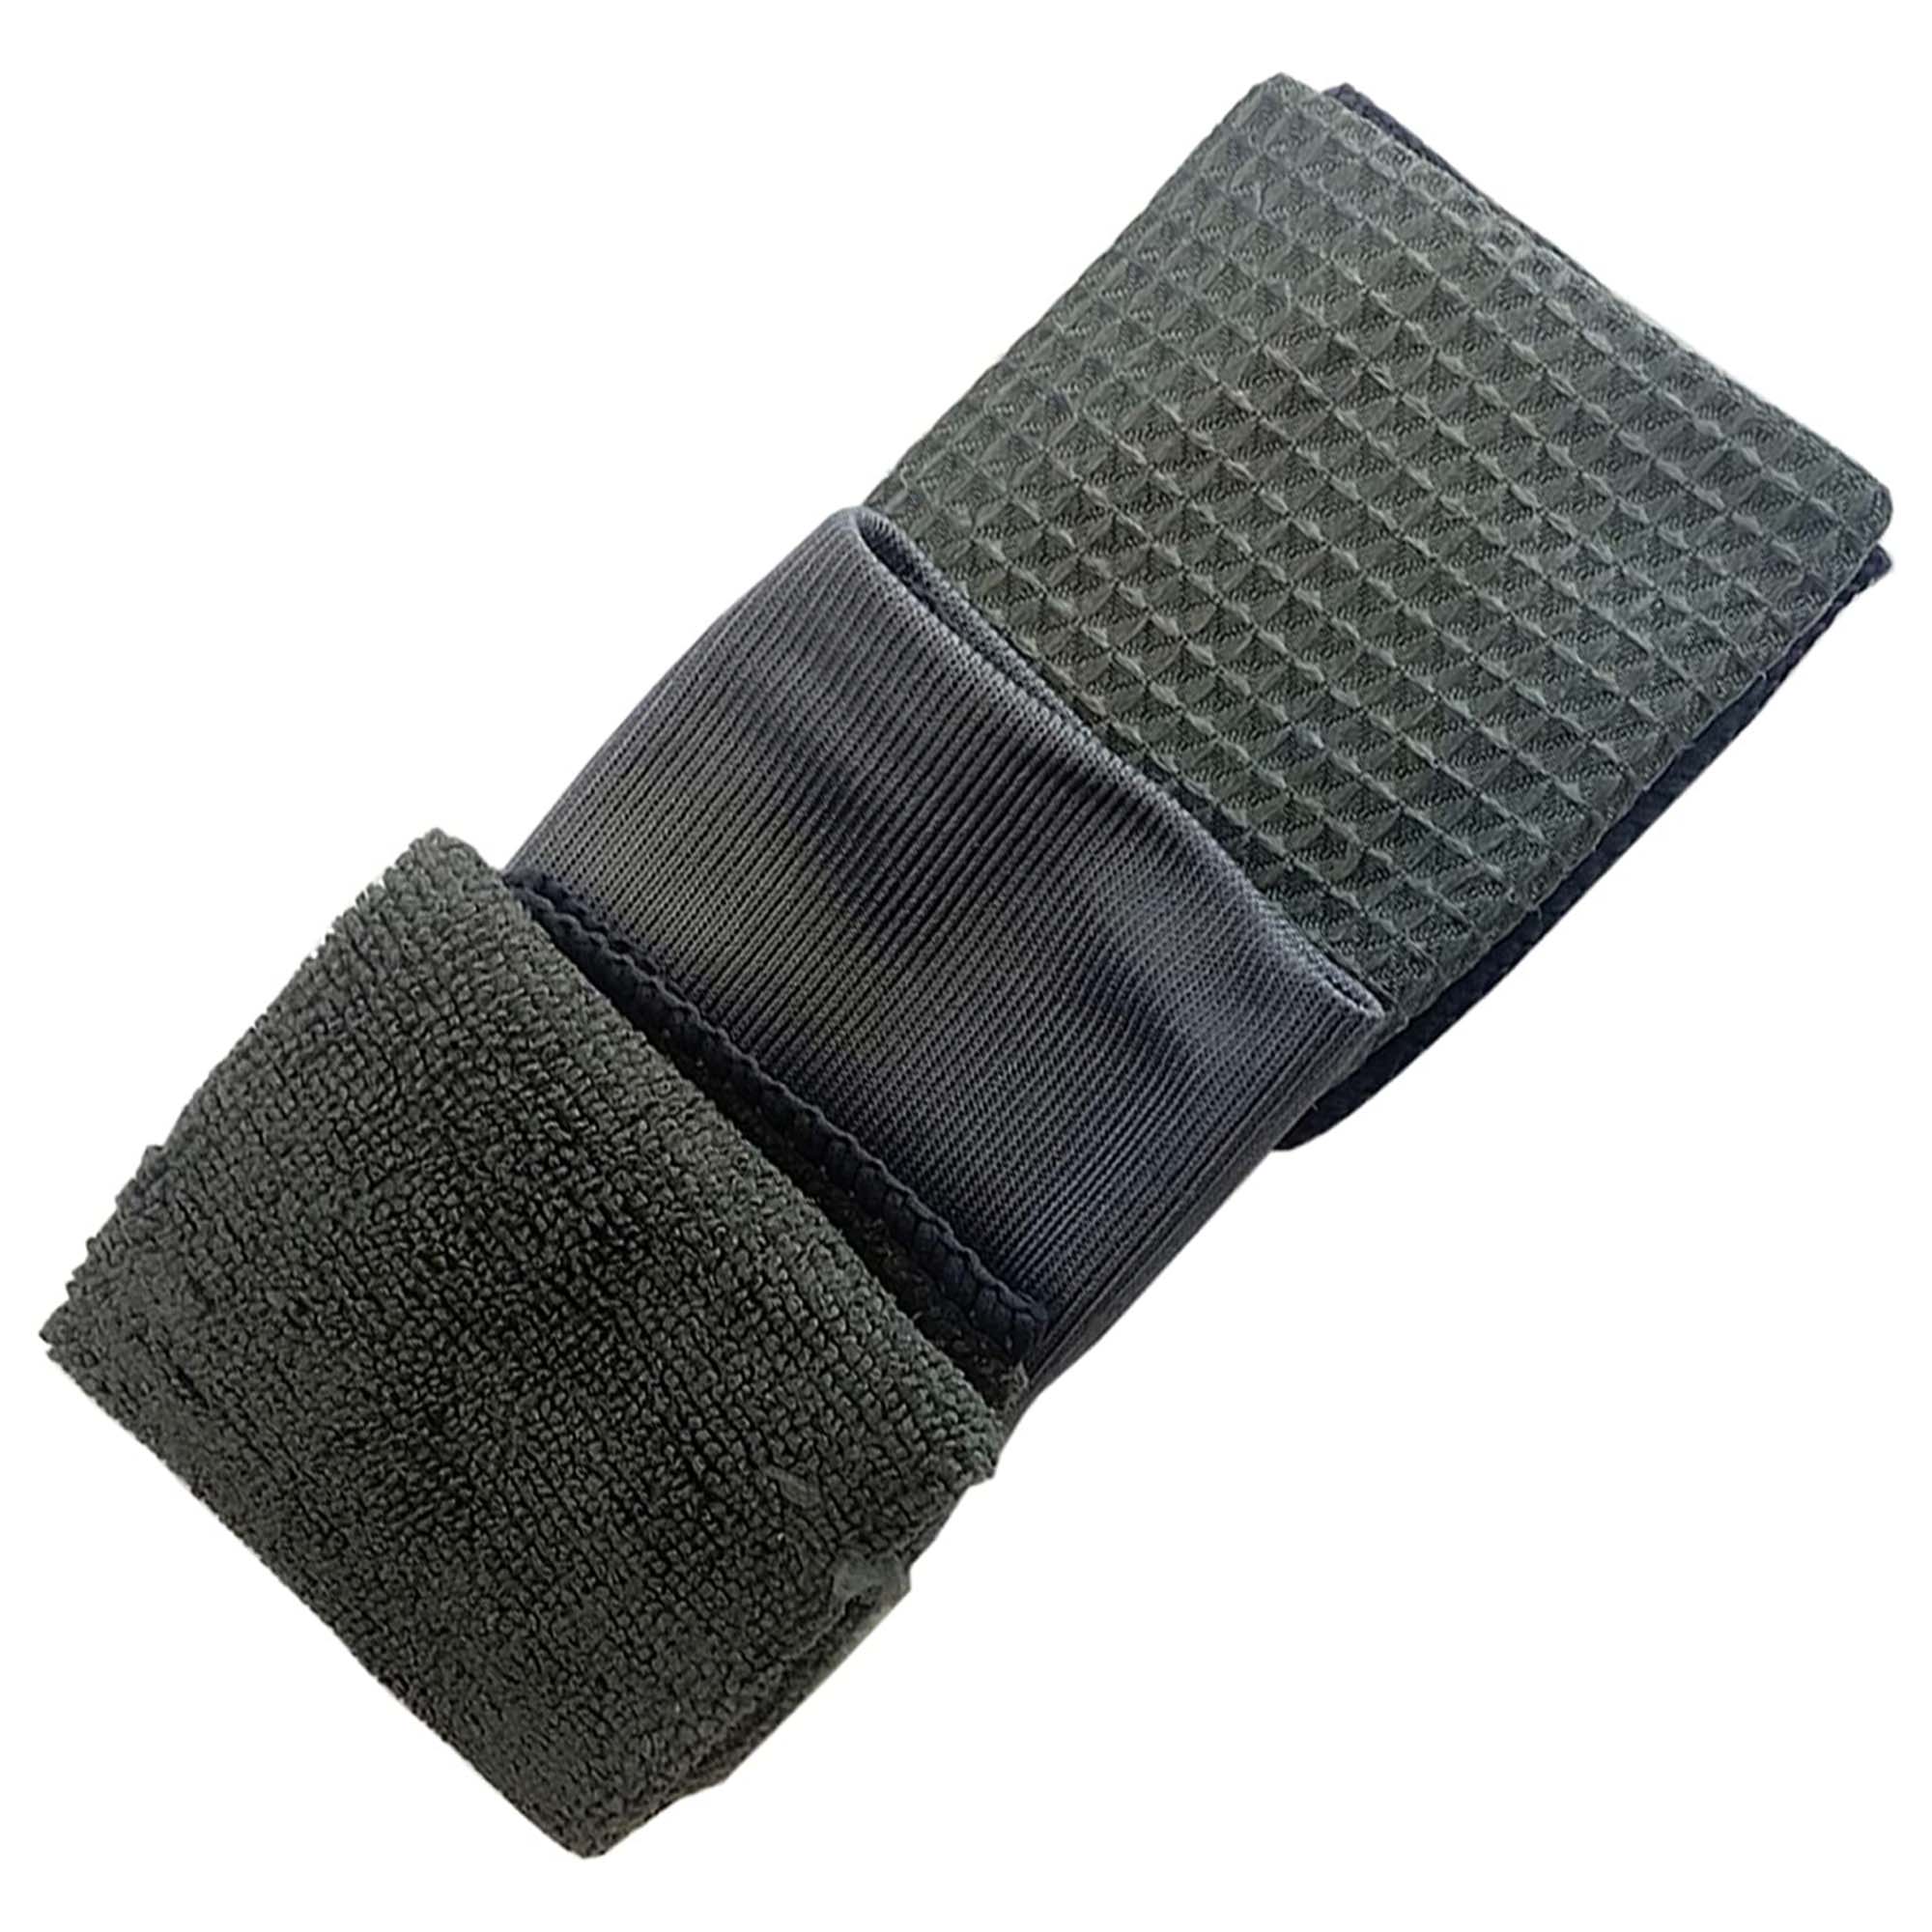 3 piece all-purpose cleaning cloths